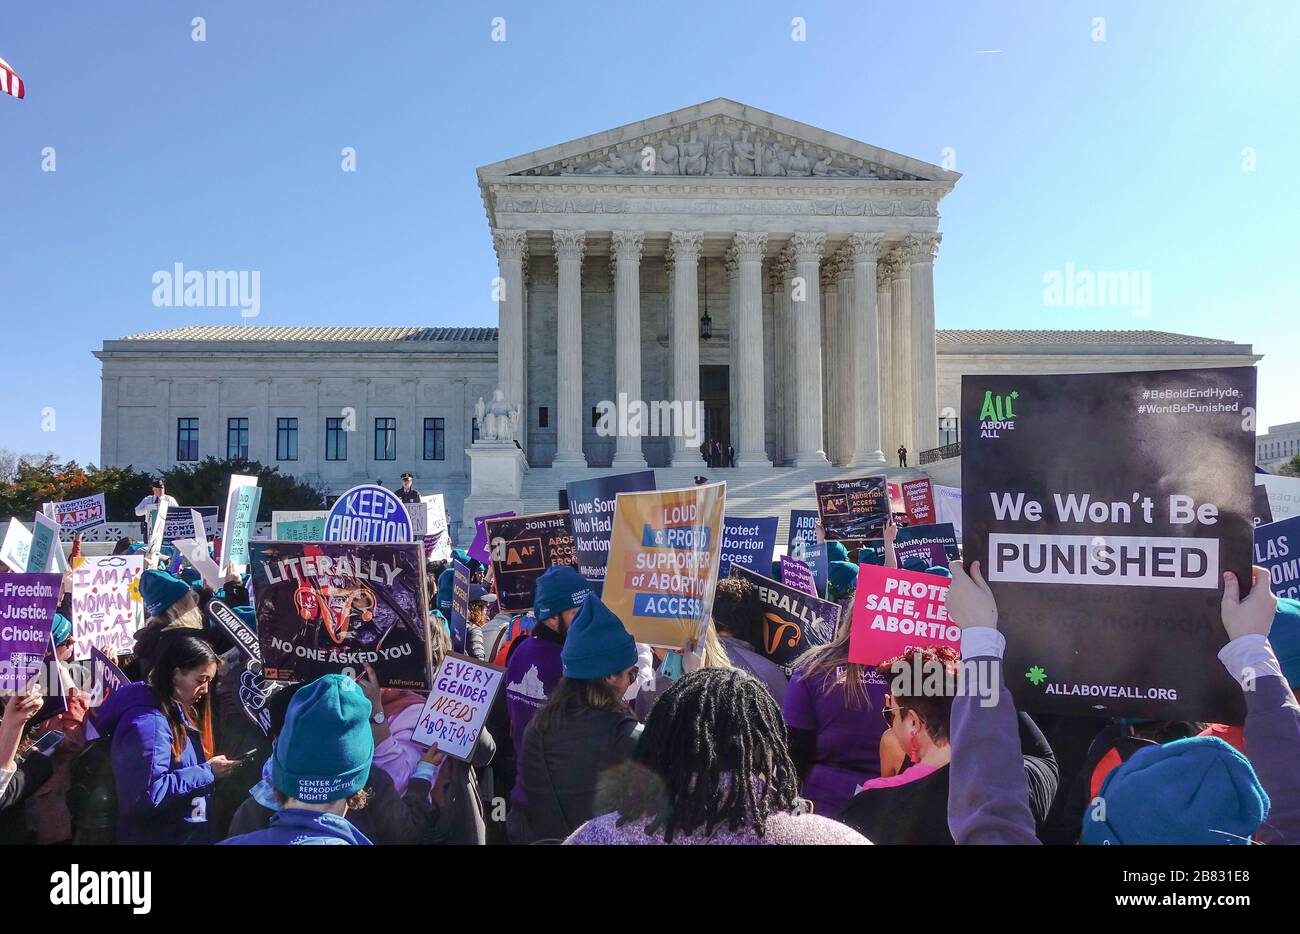 March 4, 2020 - Demonstrators rally in front of the U.S. Supreme Court in support of abortion rights as the court hears arguments in the June Medical v. Russo case.  Presented by the Center for Reproductive Rights, the case challenges a Louisiana law (Act 60) that would severely limit access to abortion in the state.  The Louisiana law is identical to a Texas law that was struck down by the Supreme Court in 2016. Stock Photo